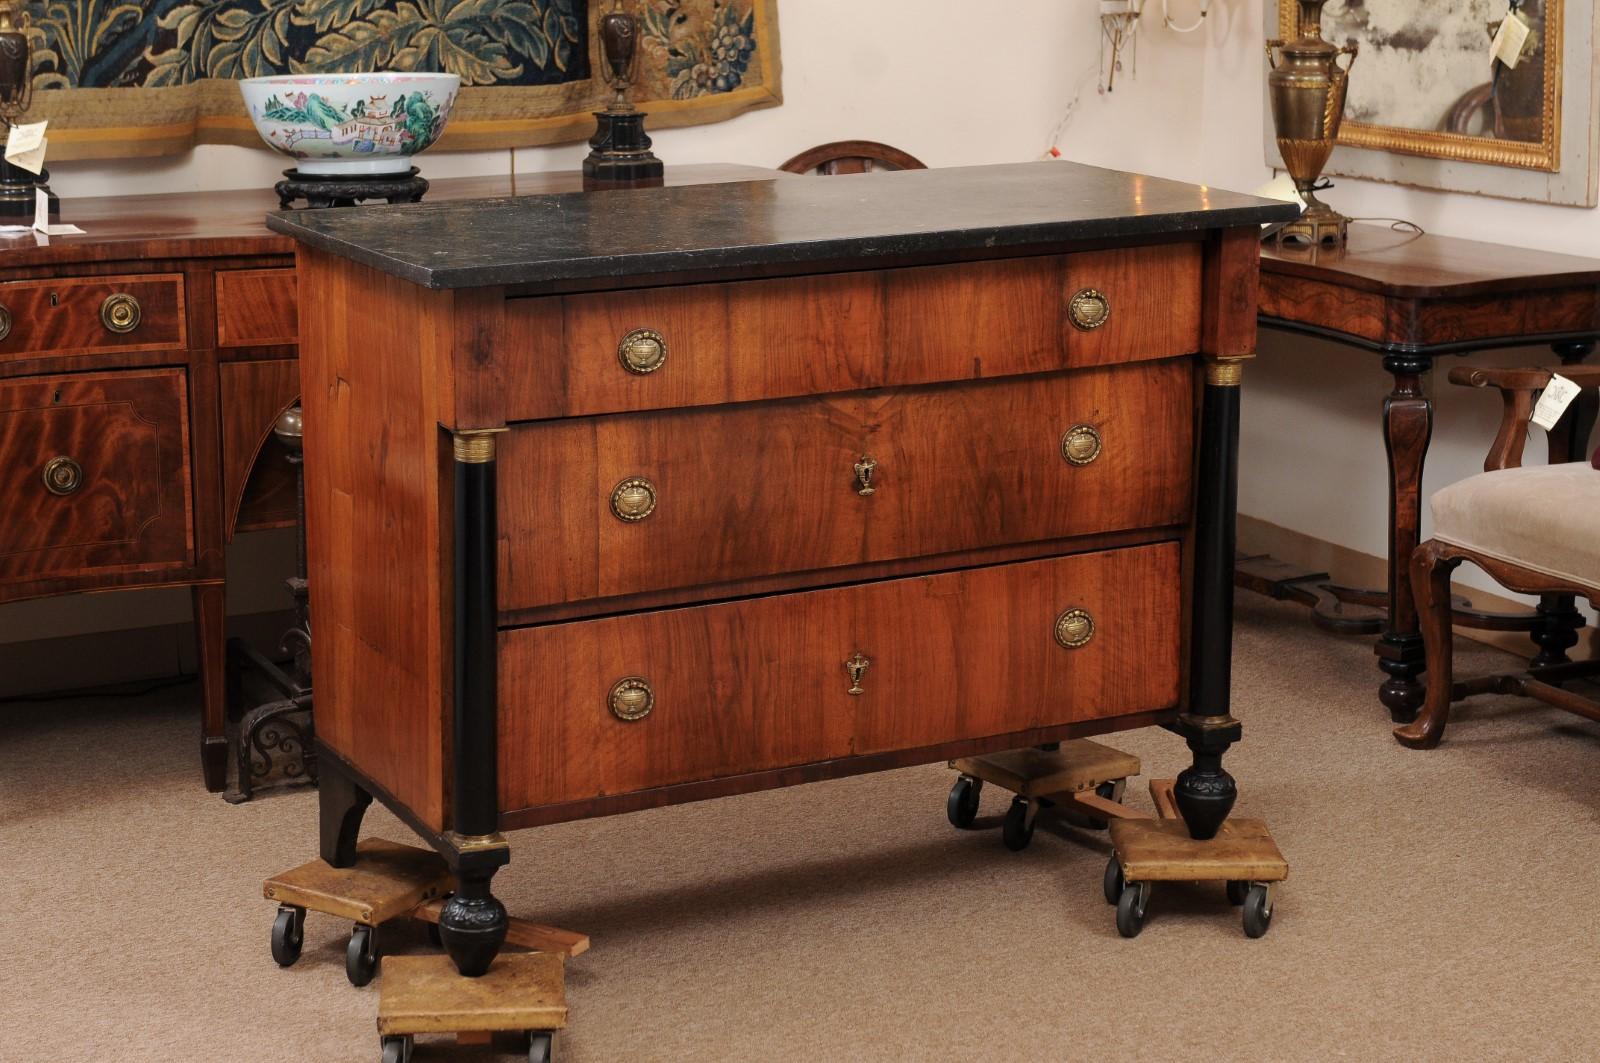 Empire Period commode with black marble top, light walnut patina, three drawers, flanking ebonized columns with gilt mounts and all resting on turned feet, 19th century Continental Europe.